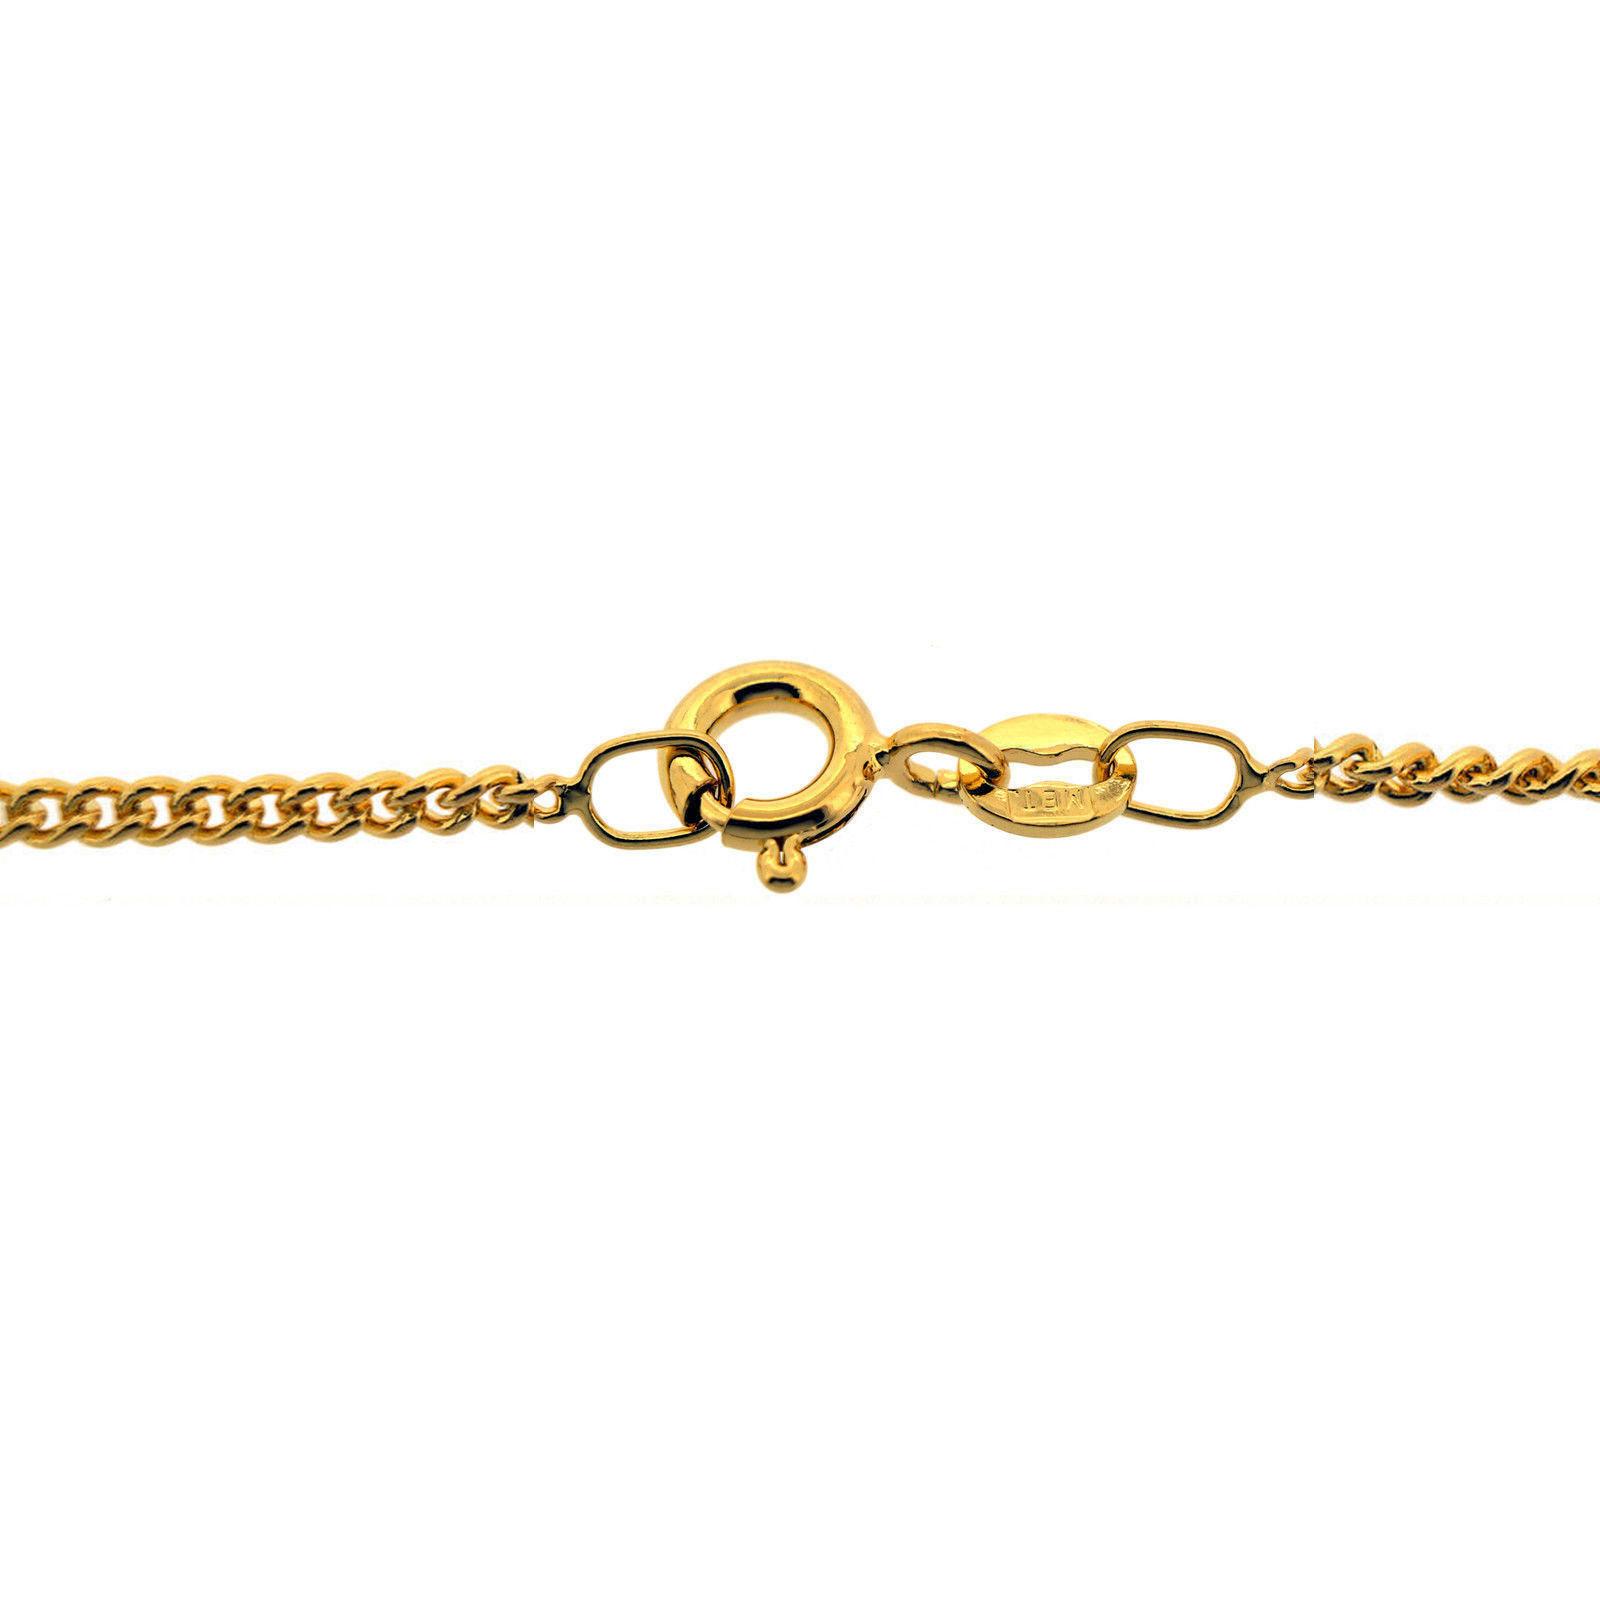 Italian made Organically E-coated 9ct Gold Plated 1.8mm Curb Chains